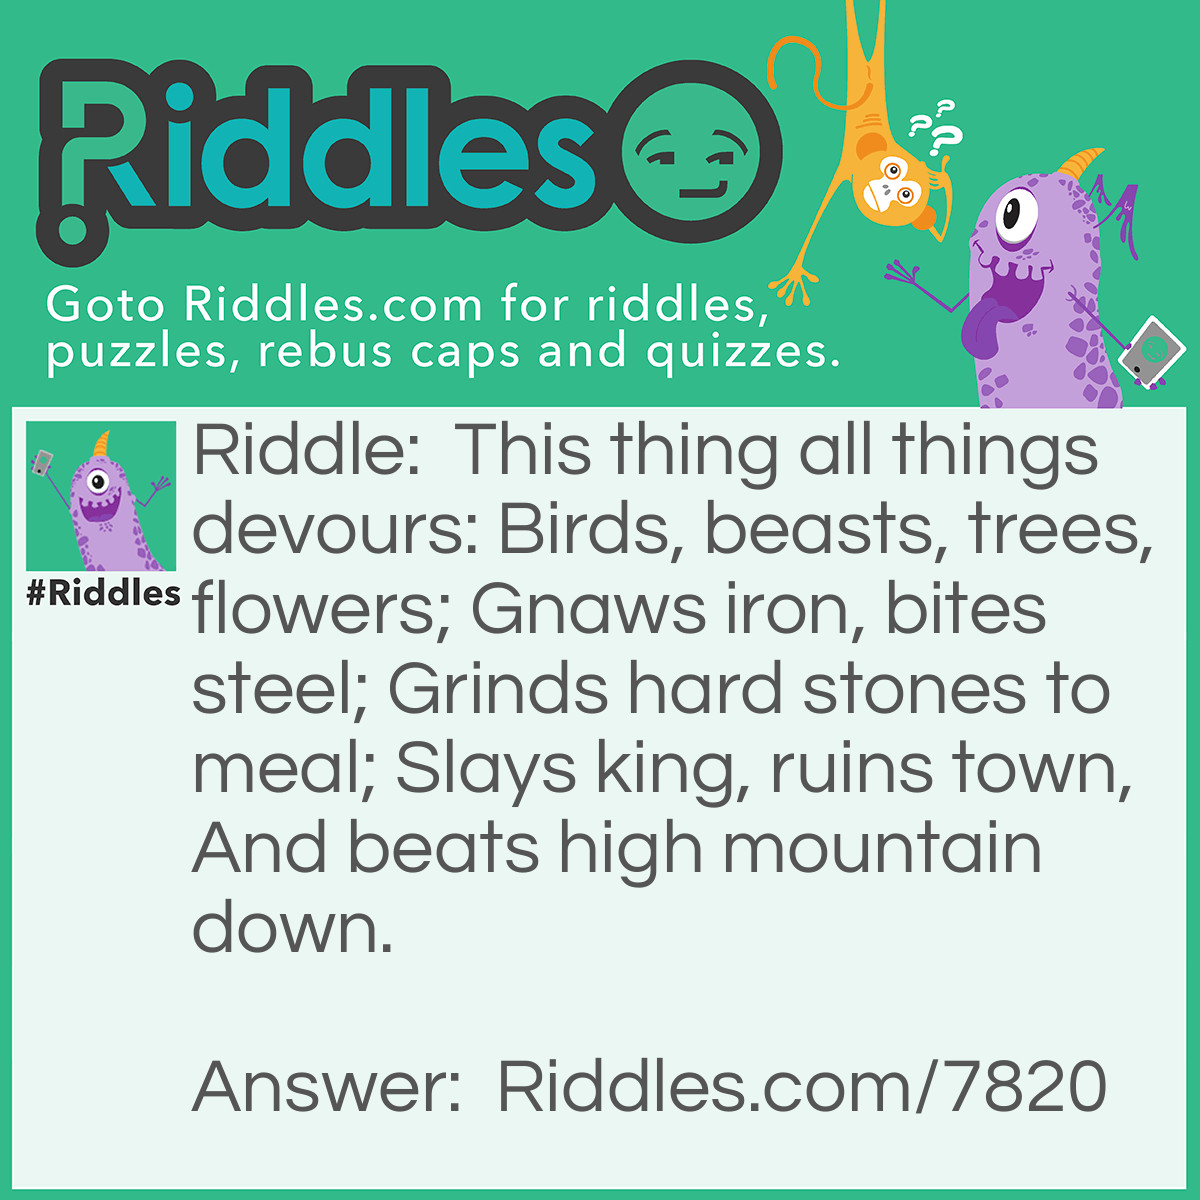 Riddle: This thing all things devours: Birds, beasts, trees, flowers; Gnaws iron, bites steel; Grinds hard stones to meal; Slays king, ruins town, And beats high mountain down. Answer: Time.